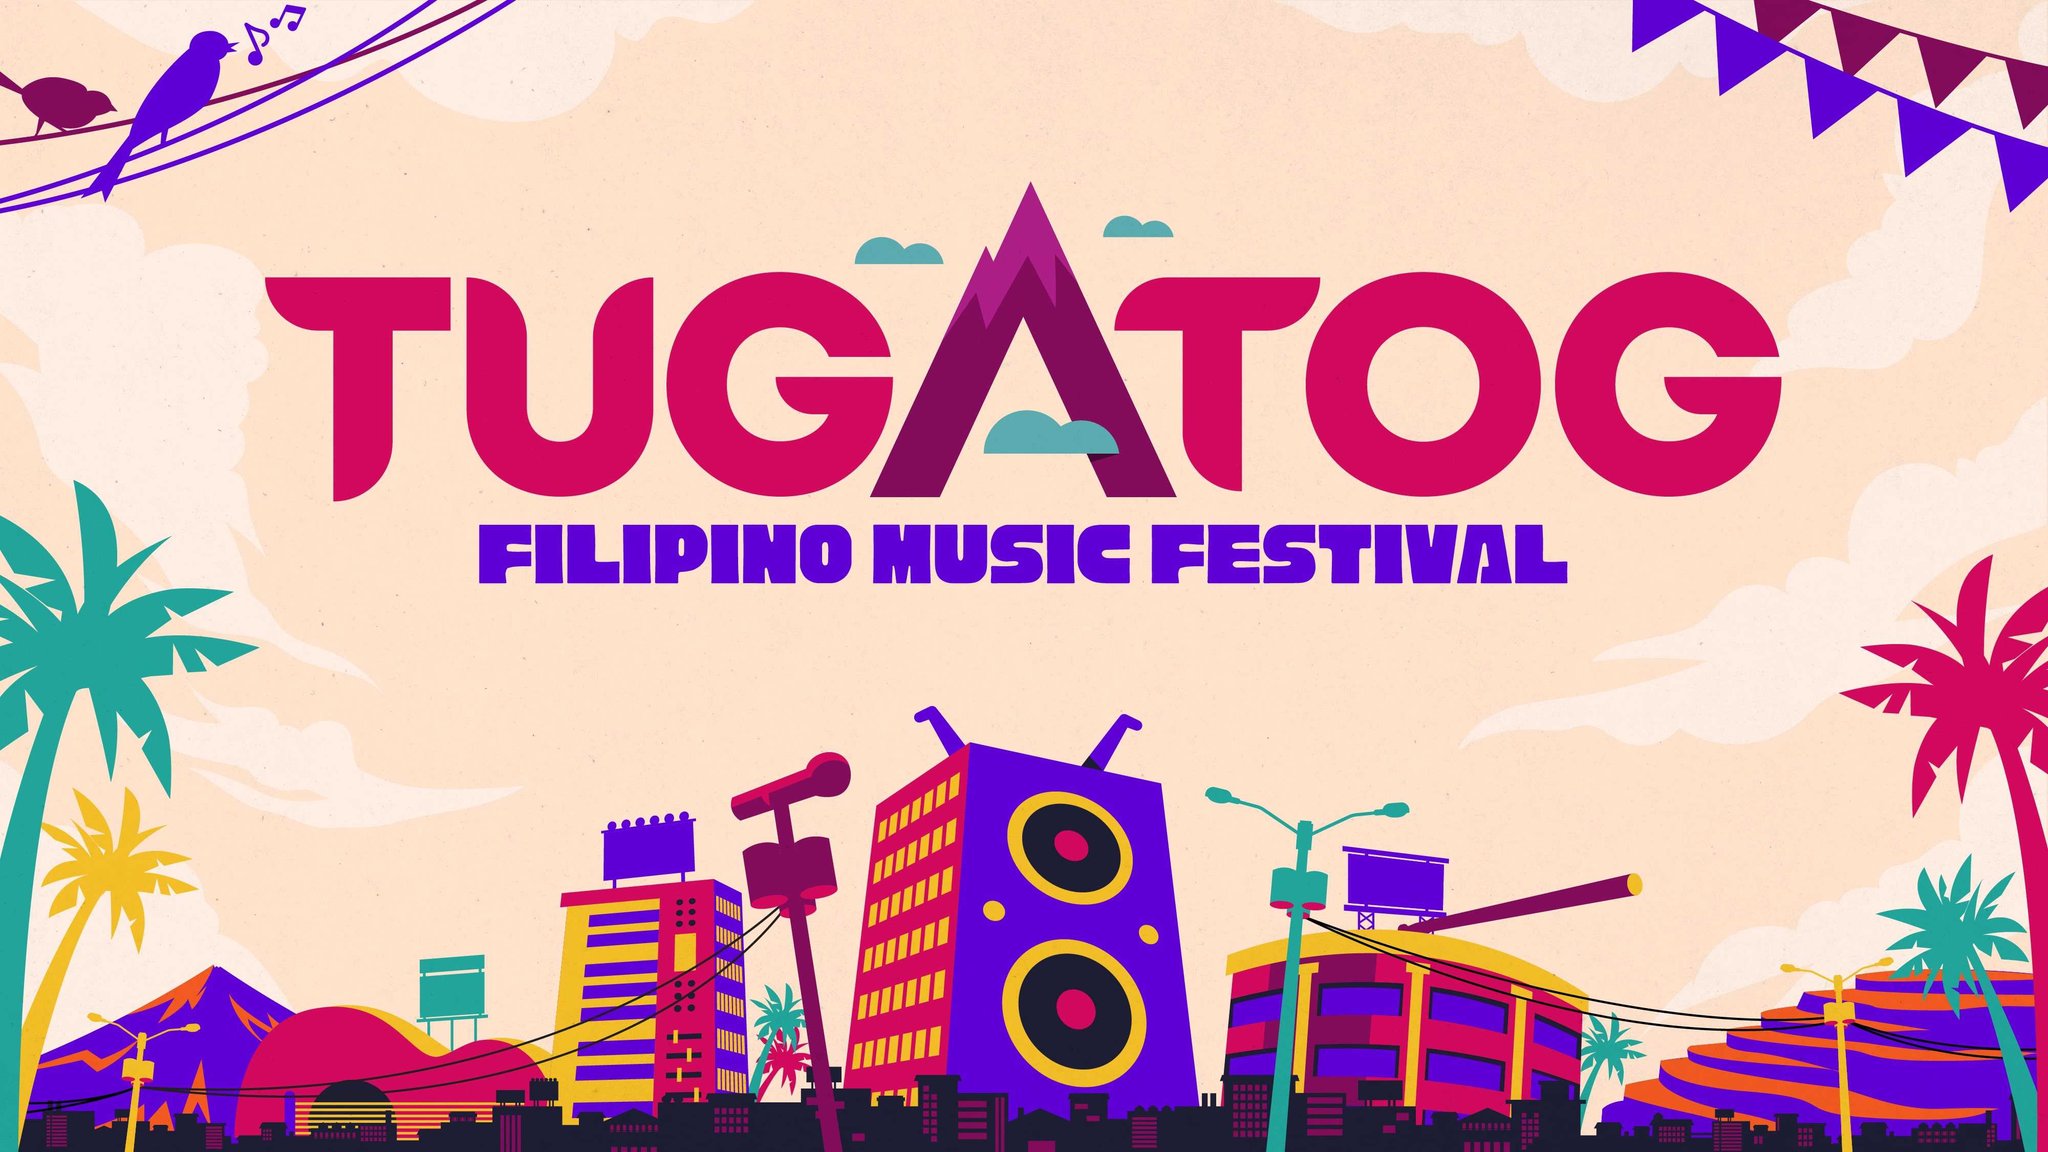 P-pop groups to perform at Tugatog Filipino Music Festival 2022